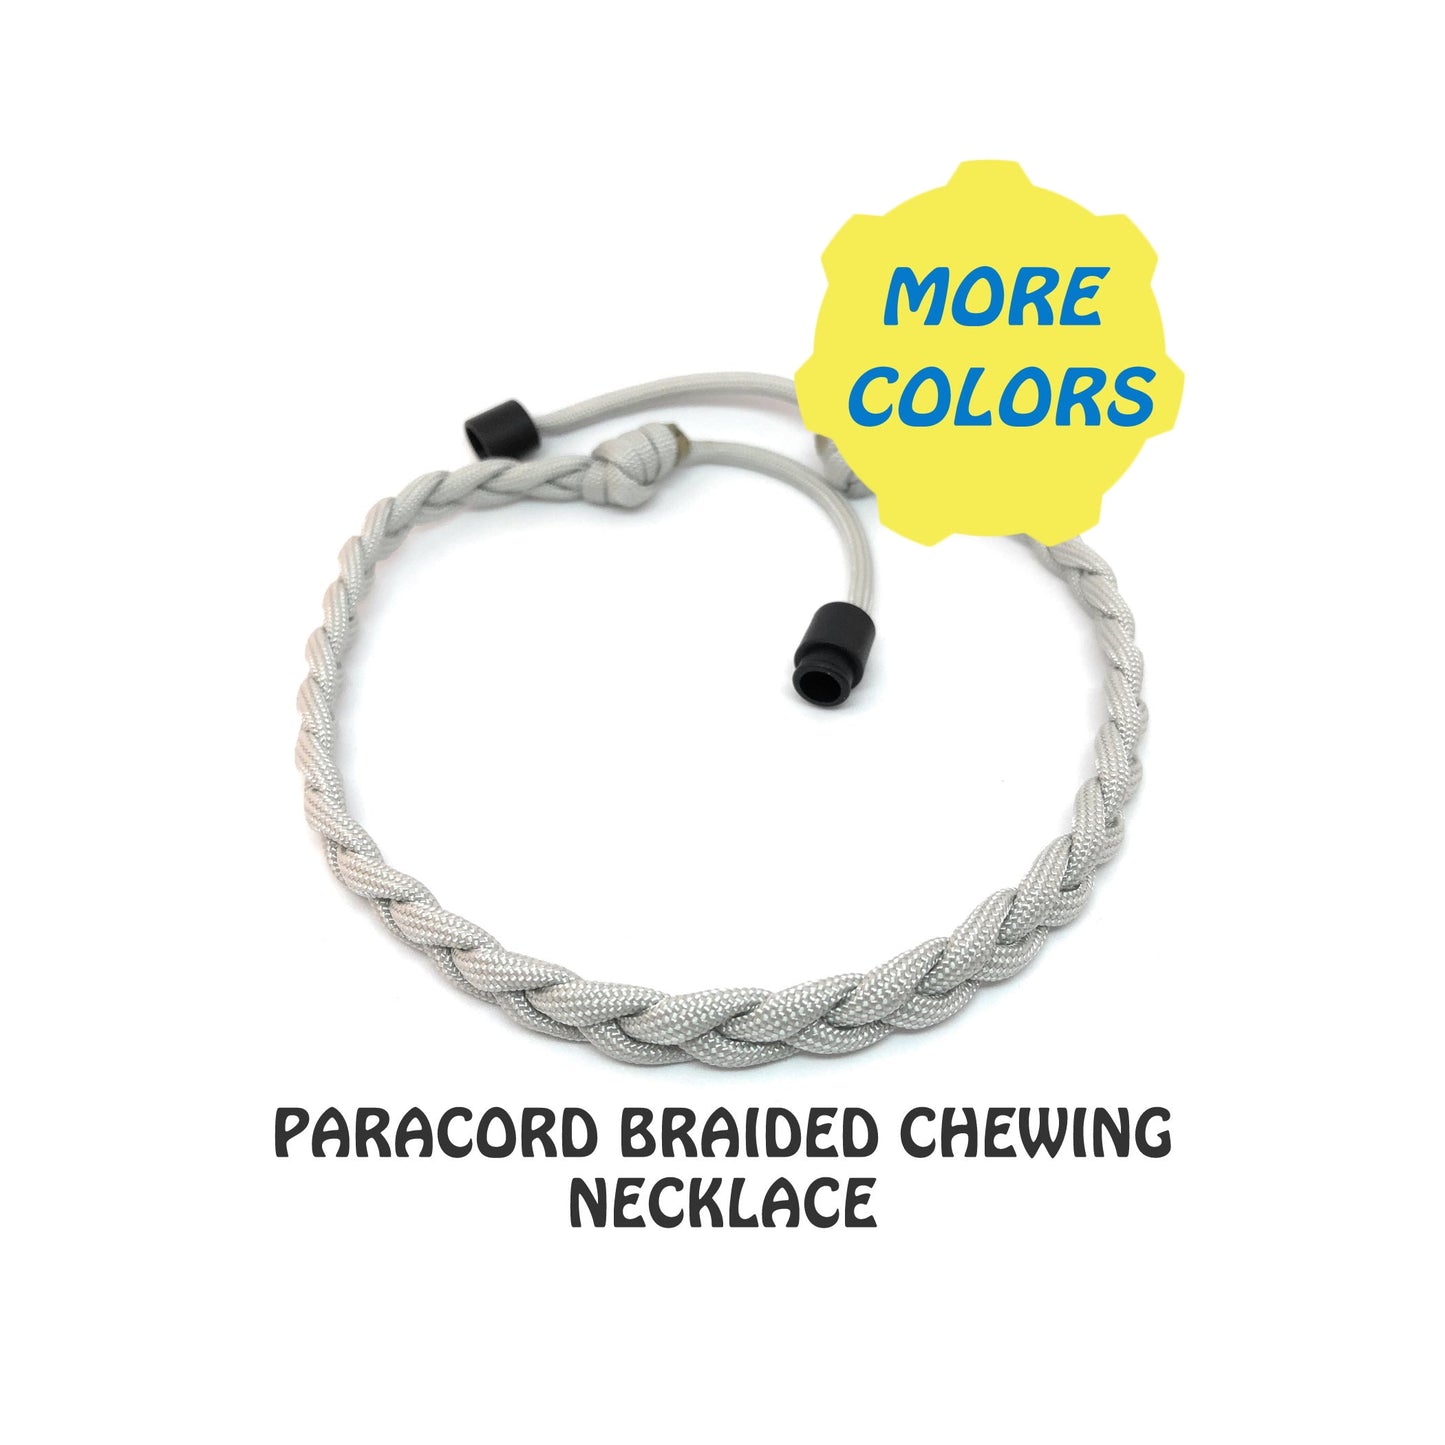 6 PACK Paracord Braid Chew Necklace - Breakaway clasp